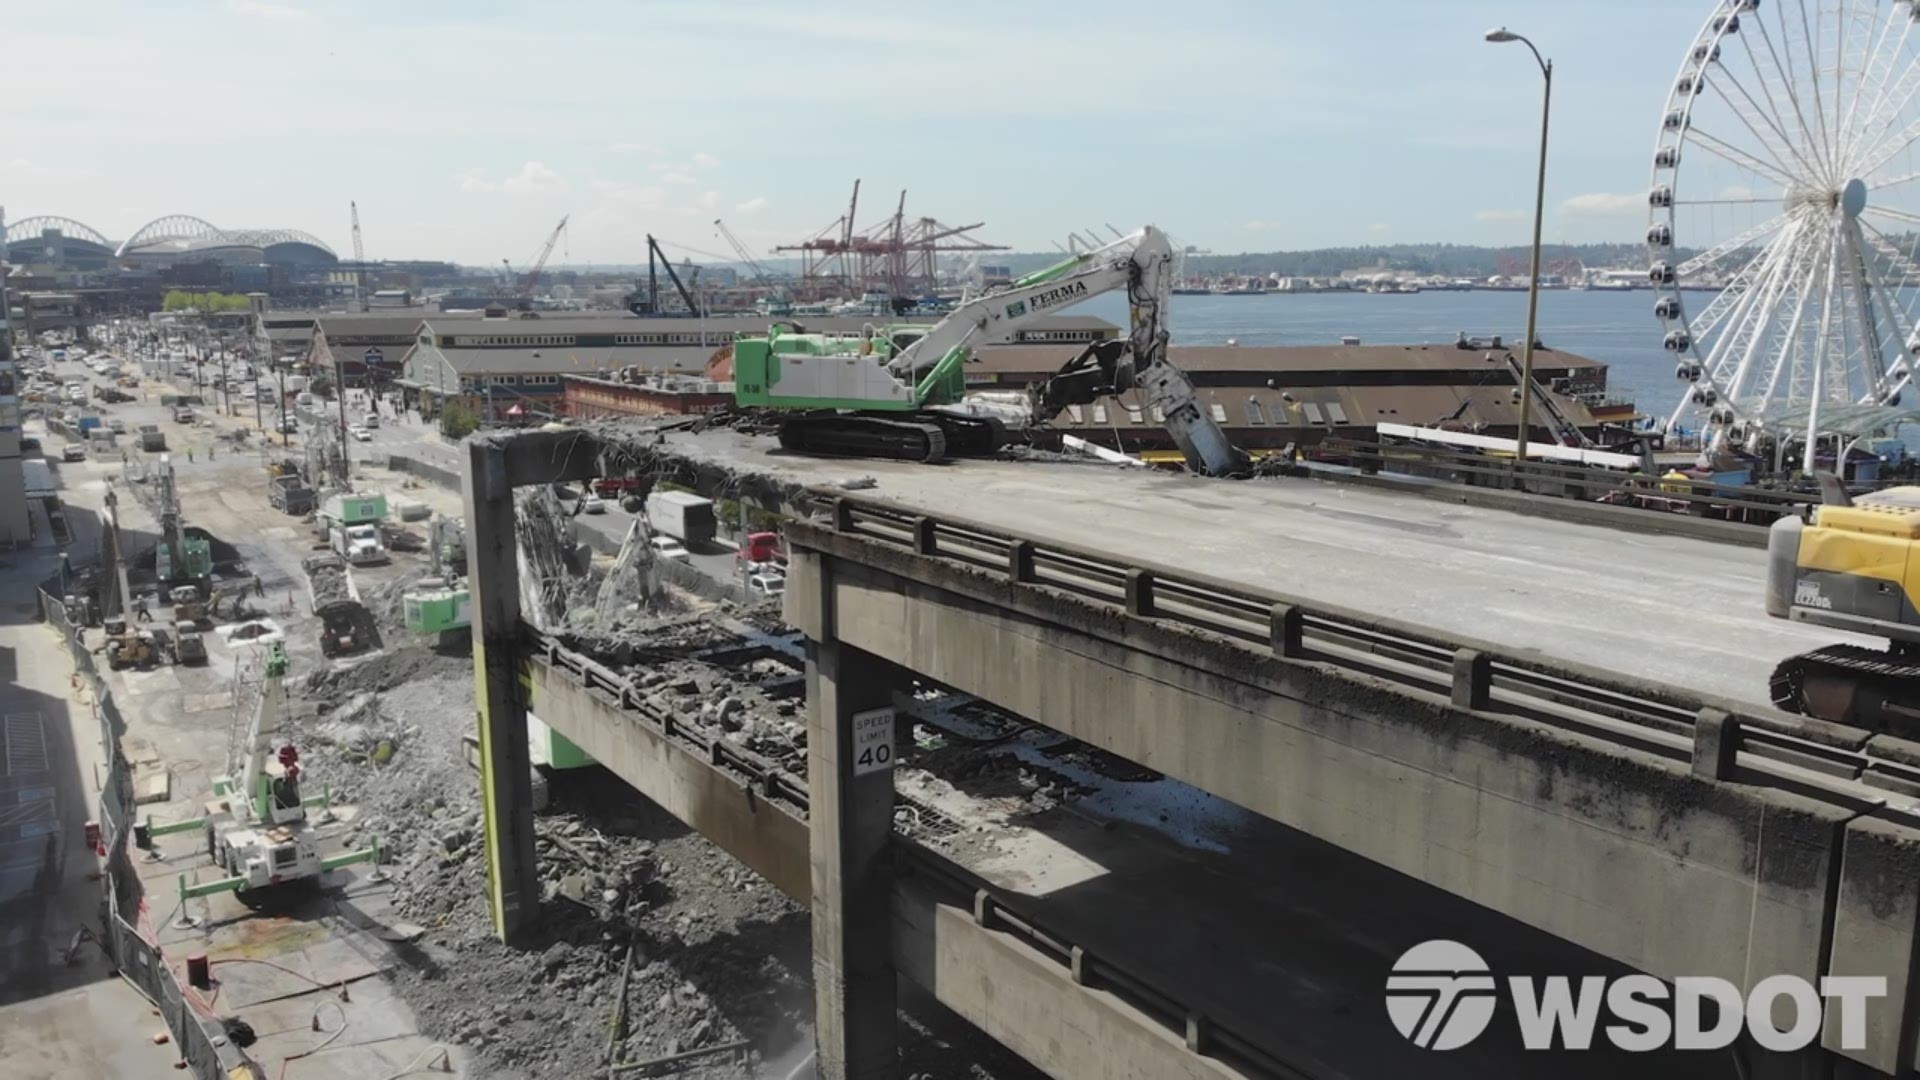 Video from WSDOT shows a behind-the-scenes look at the viaduct demolition that continues along Seattle's waterfront.